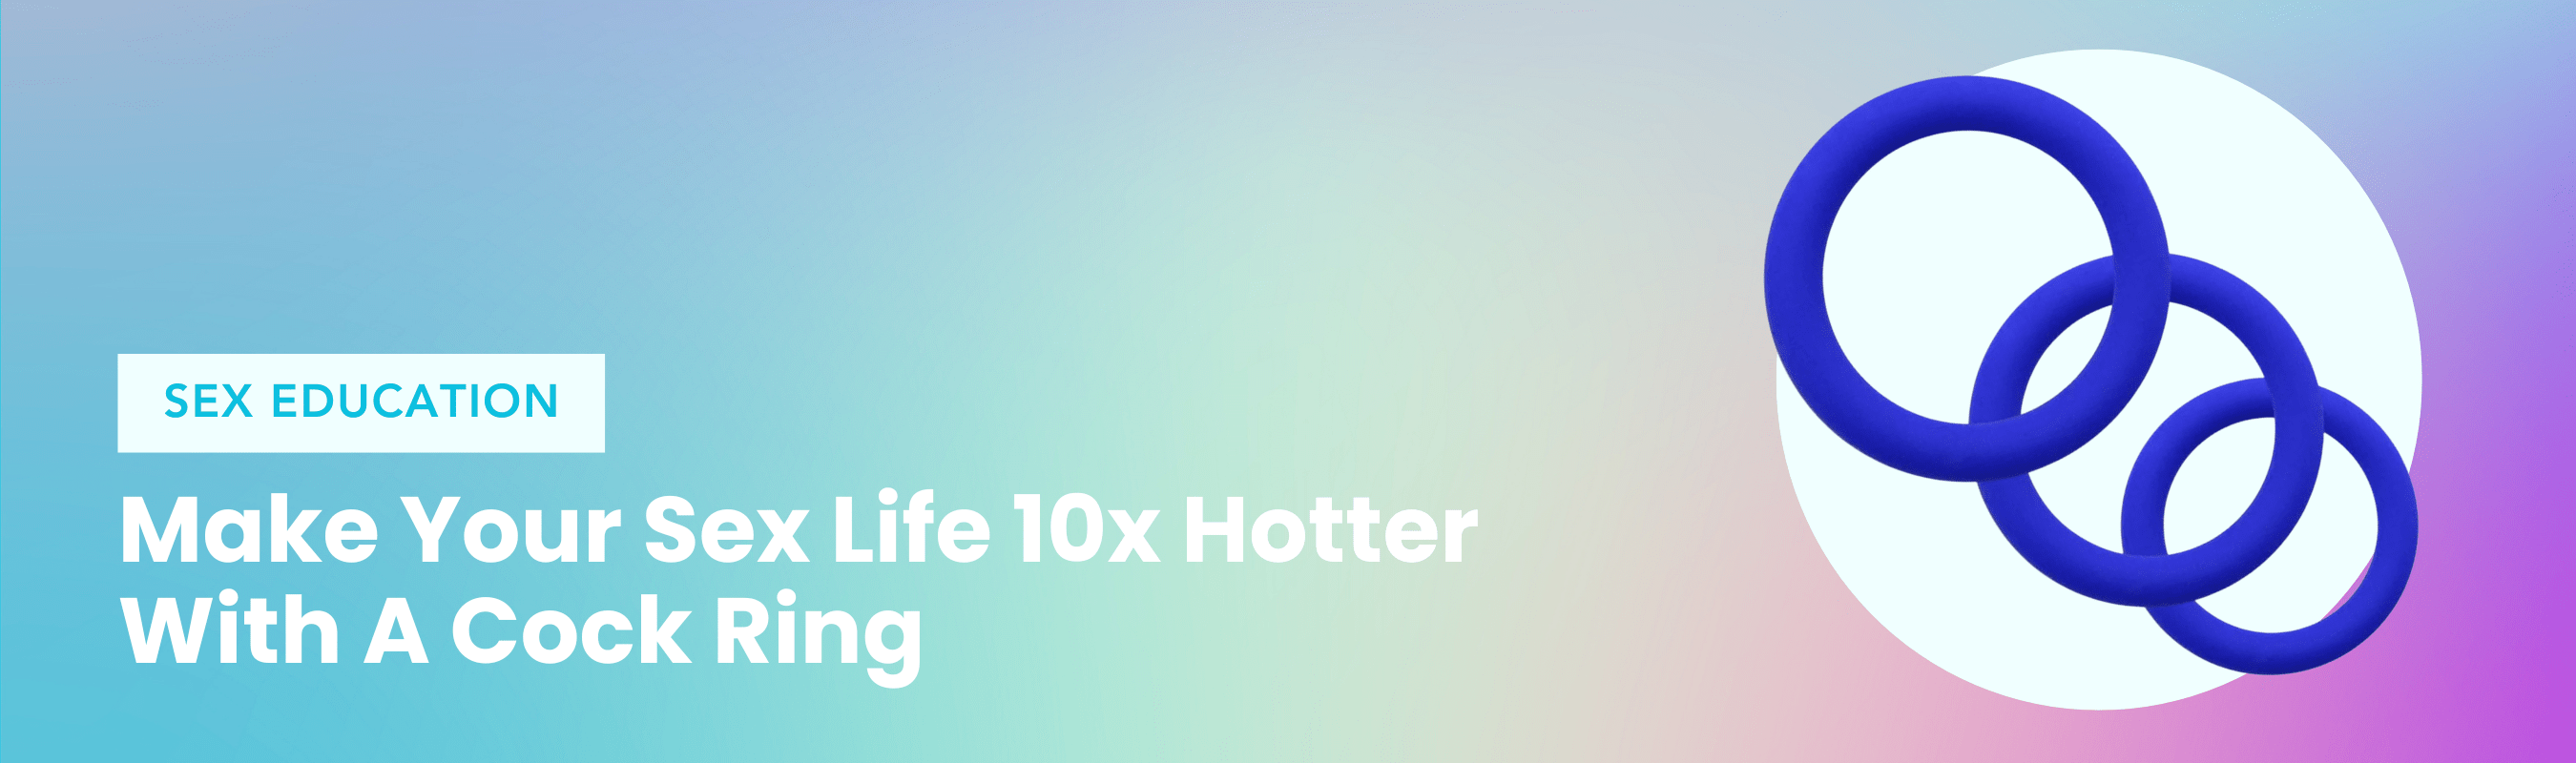 Make your sex life 10x hotter with a cock ring